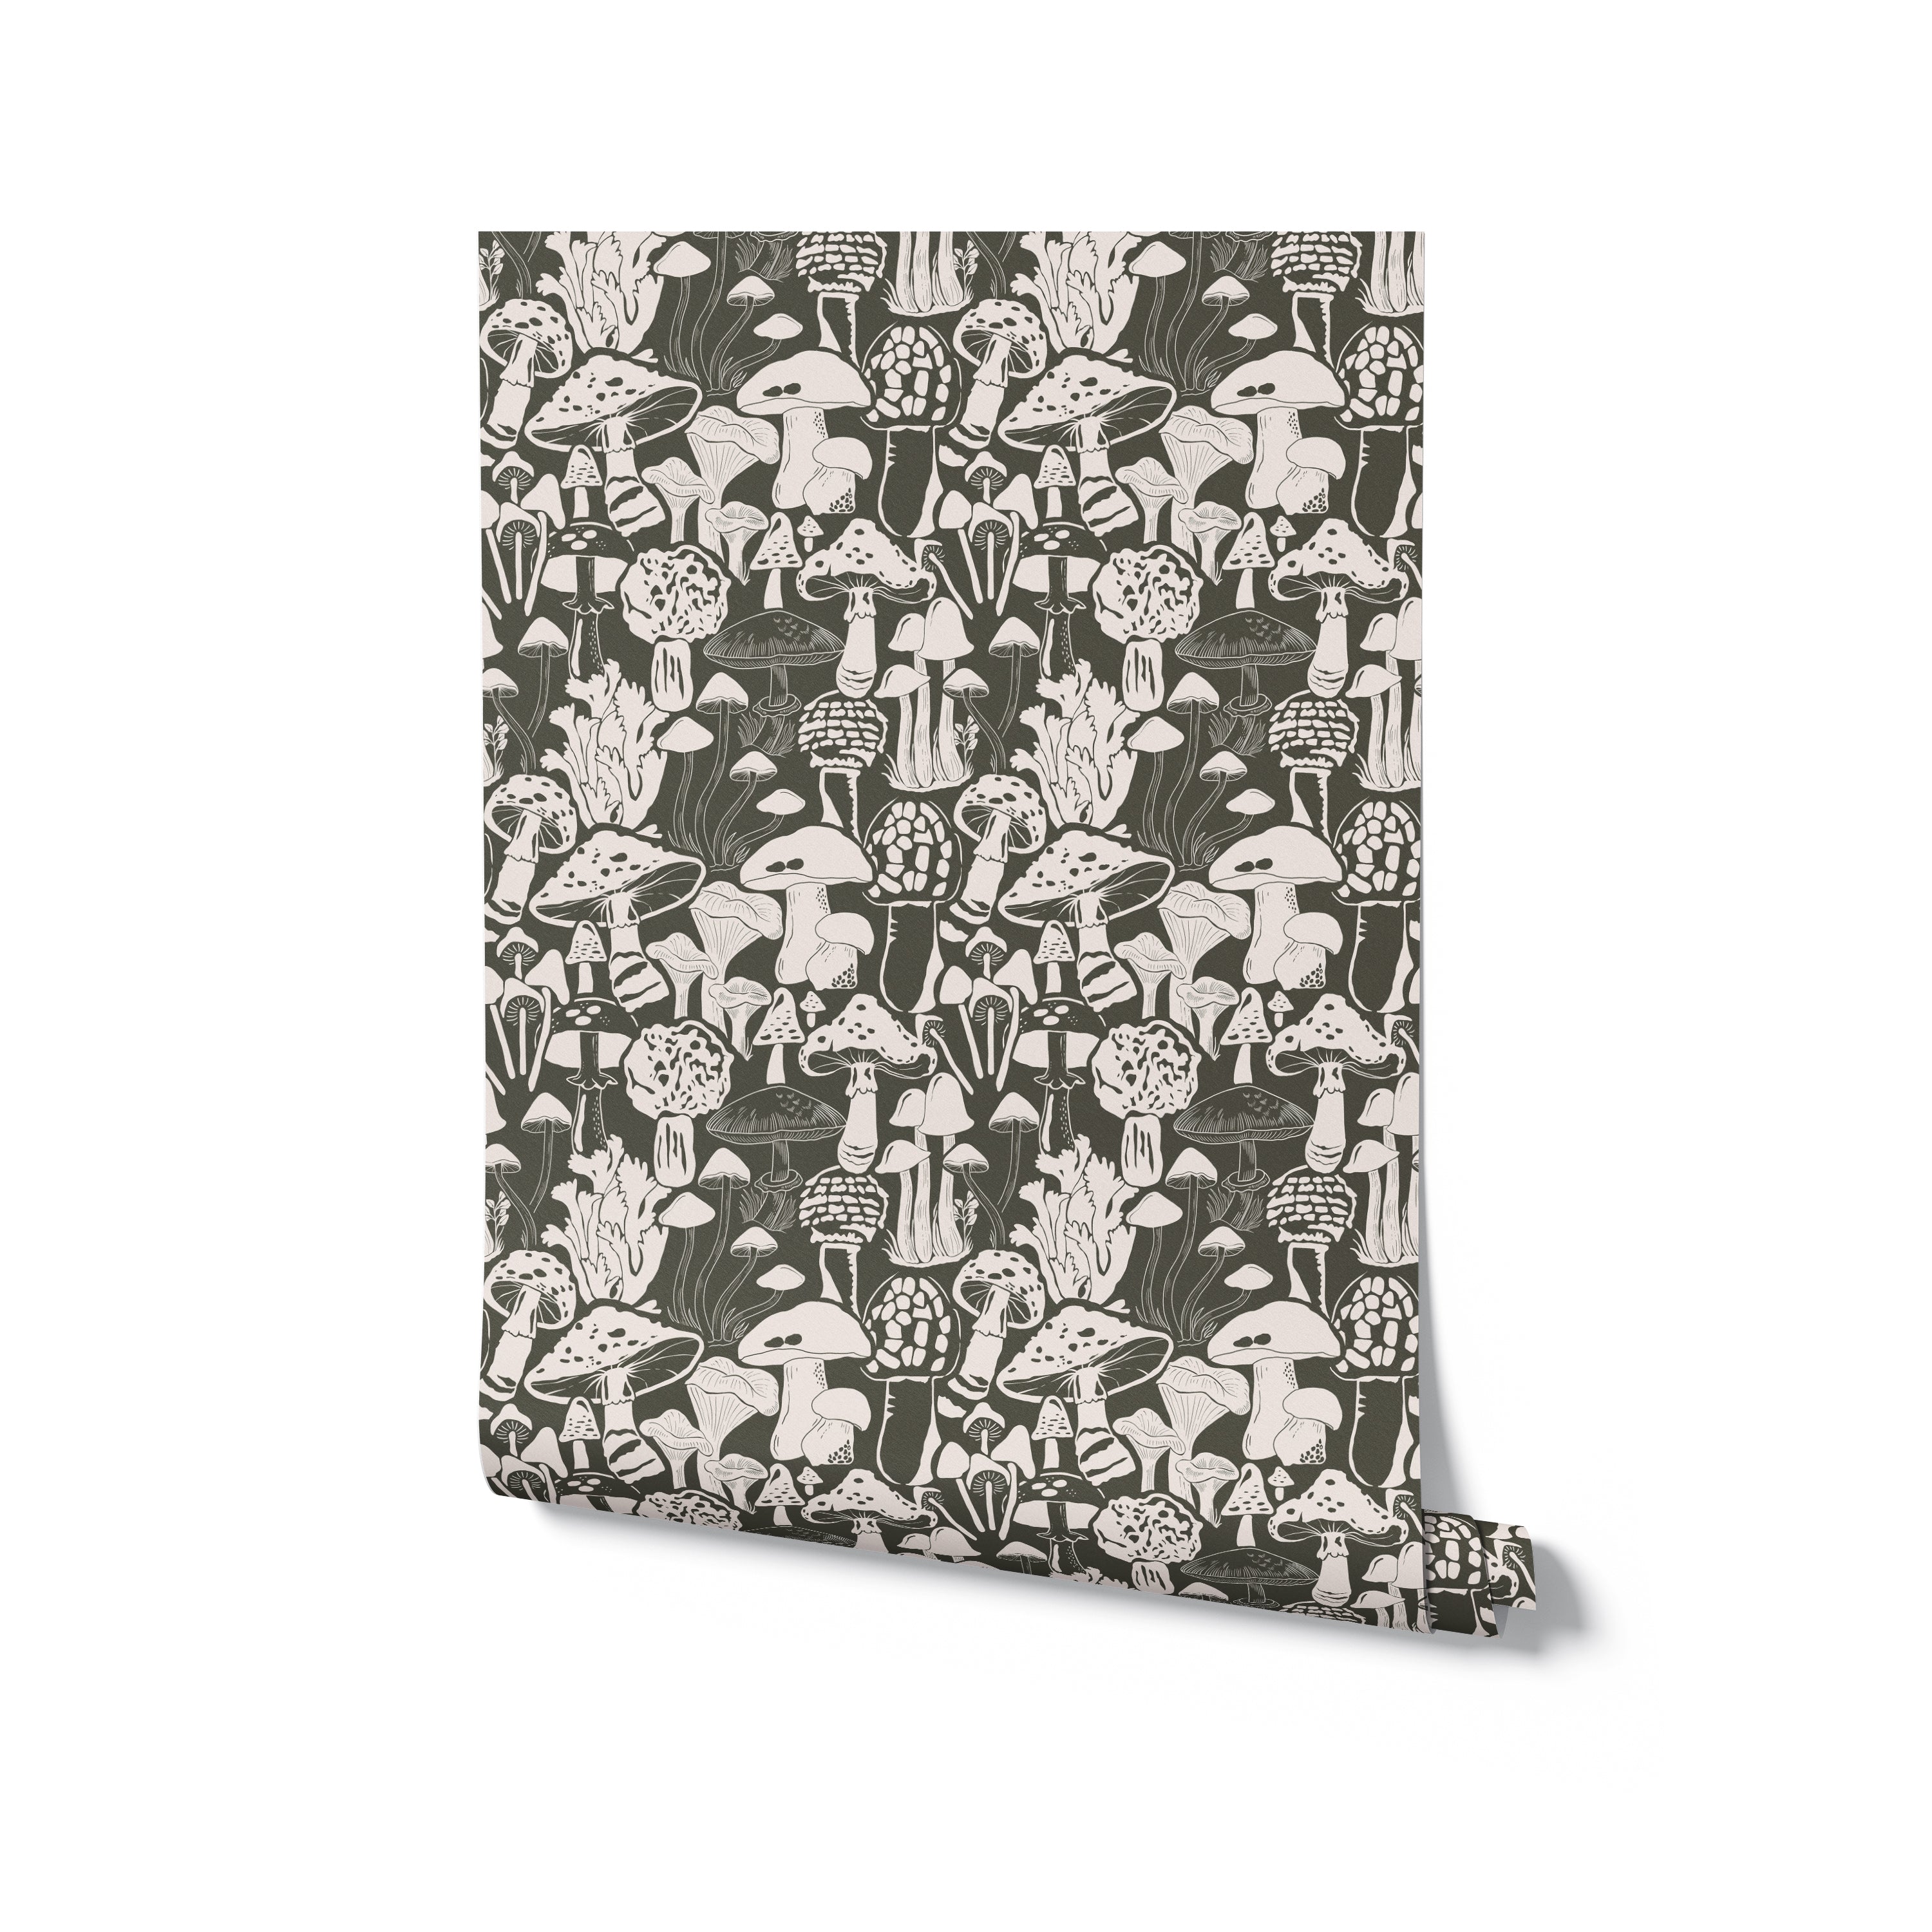 A roll of green wallpaper with a playful mushroom print in cream, displaying a variety of forest fungi that add a touch of whimsy to any room decor